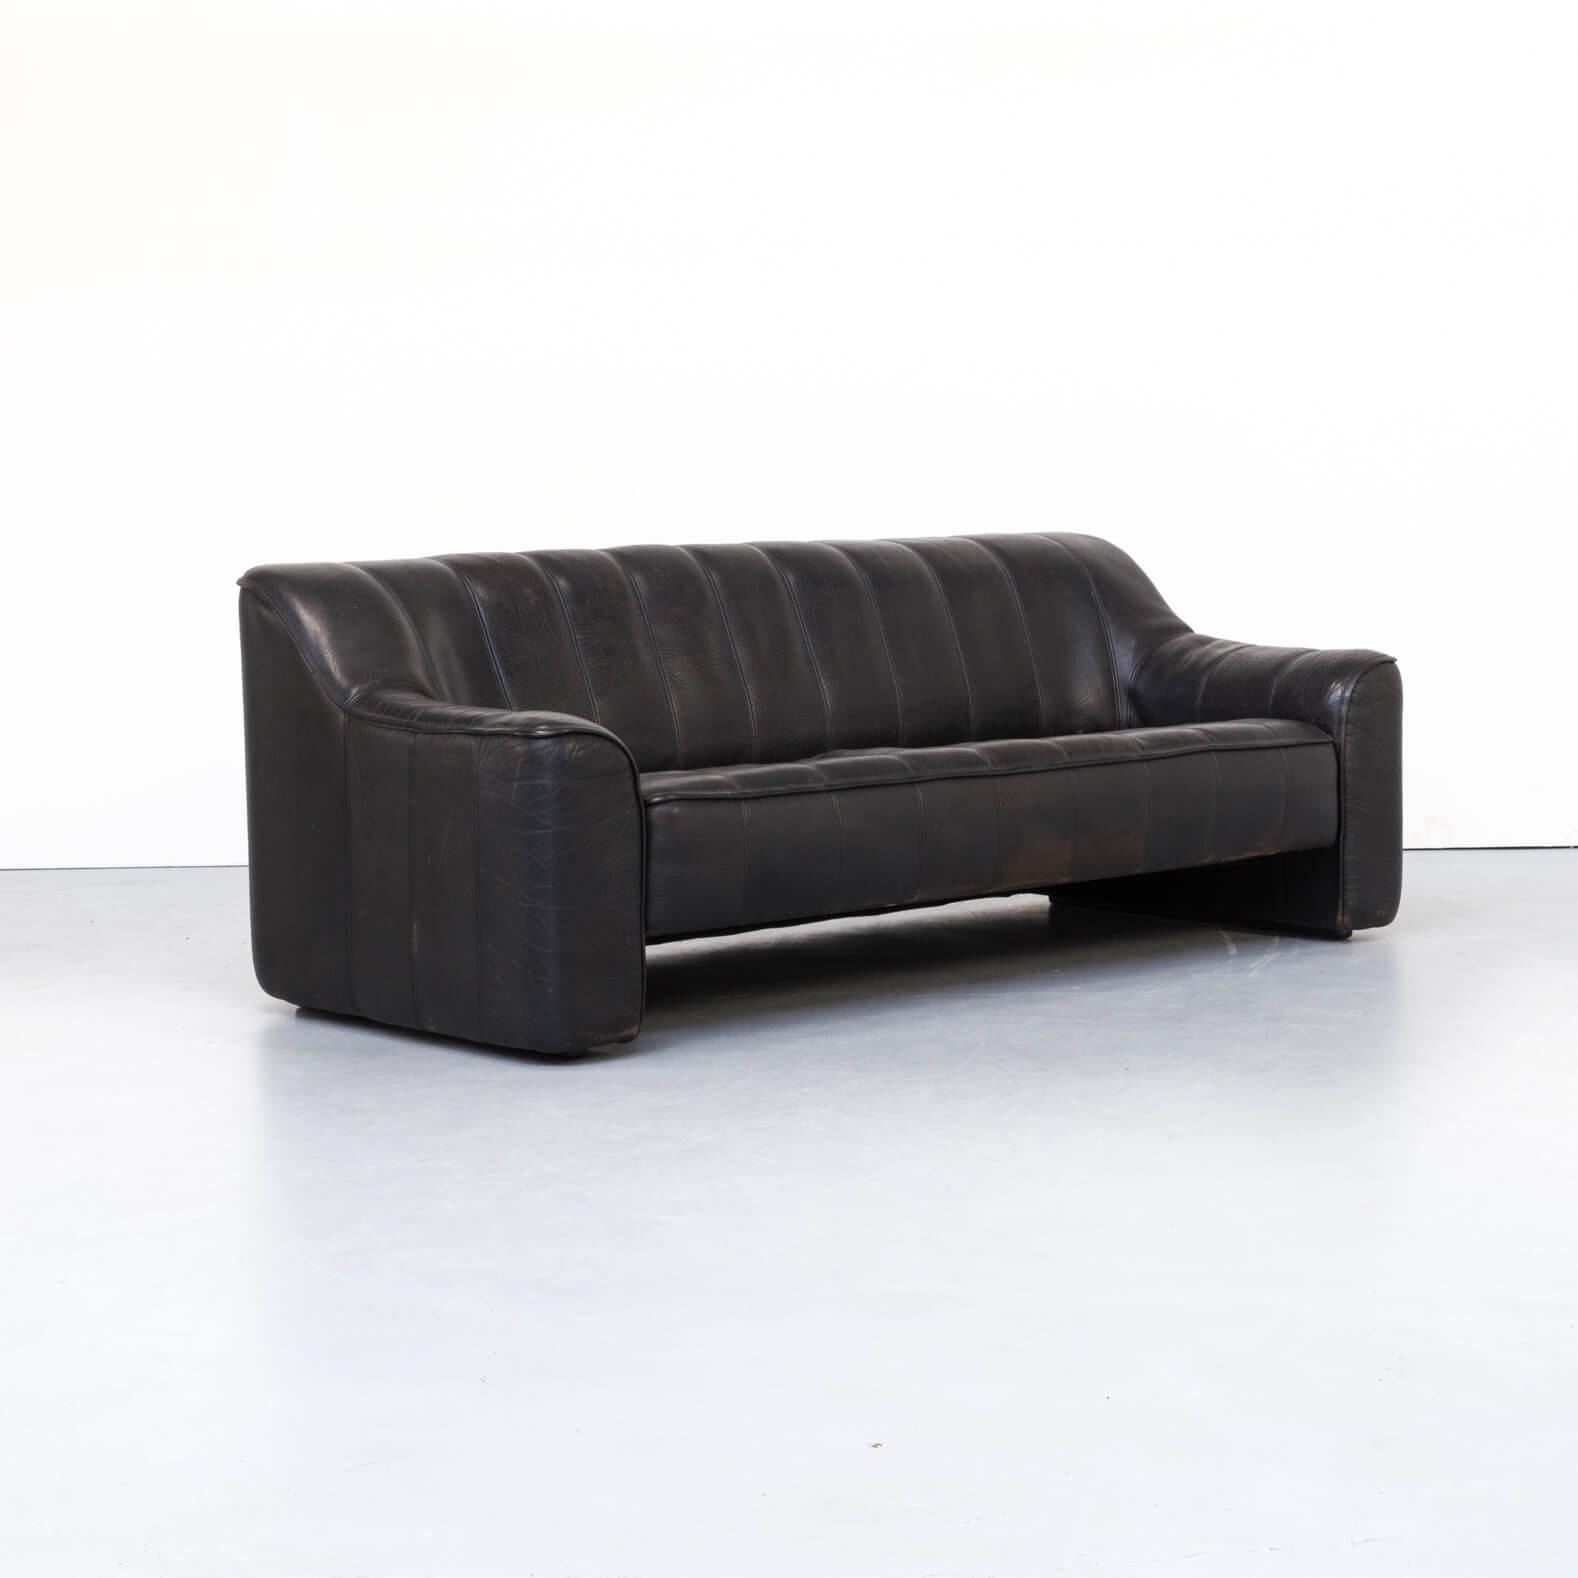 Swiss 1970s Leather 3-Seat Sofa ‘Model DS 44’ for De Sede